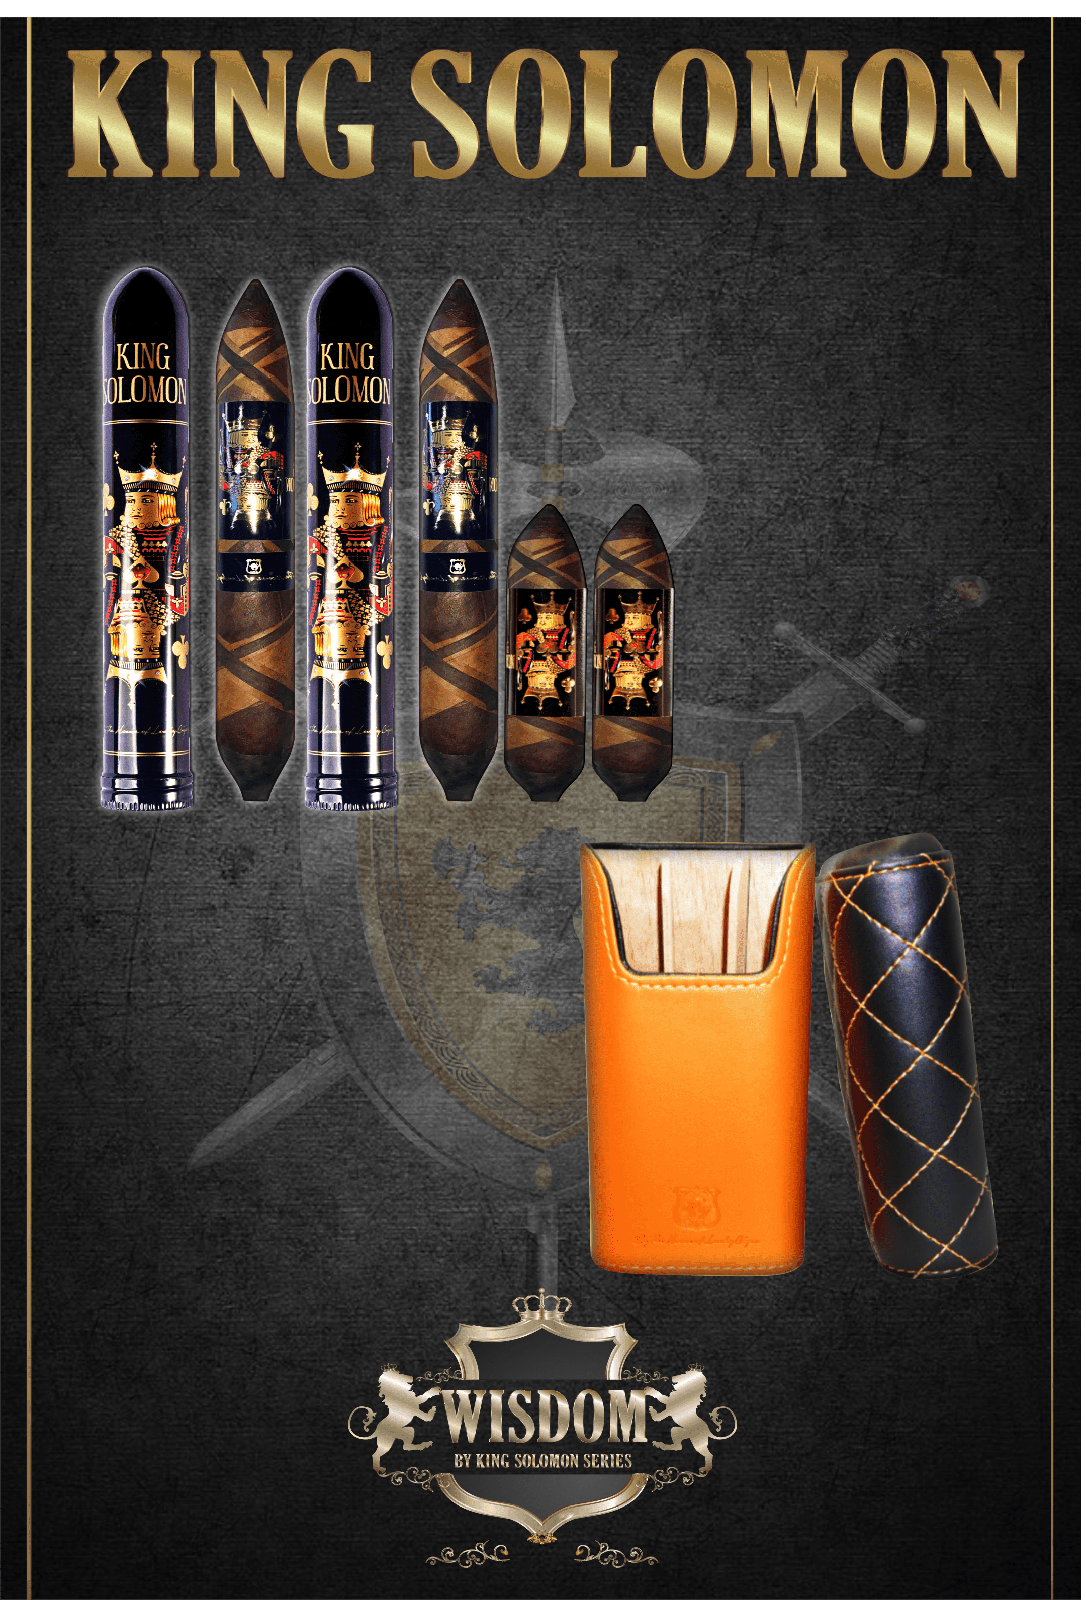 Wisdom 4x60 Cigar From The King Solomon Series: Set of 2 and 2 King Solomon 7x58 Cigar with Travel Humidor Set